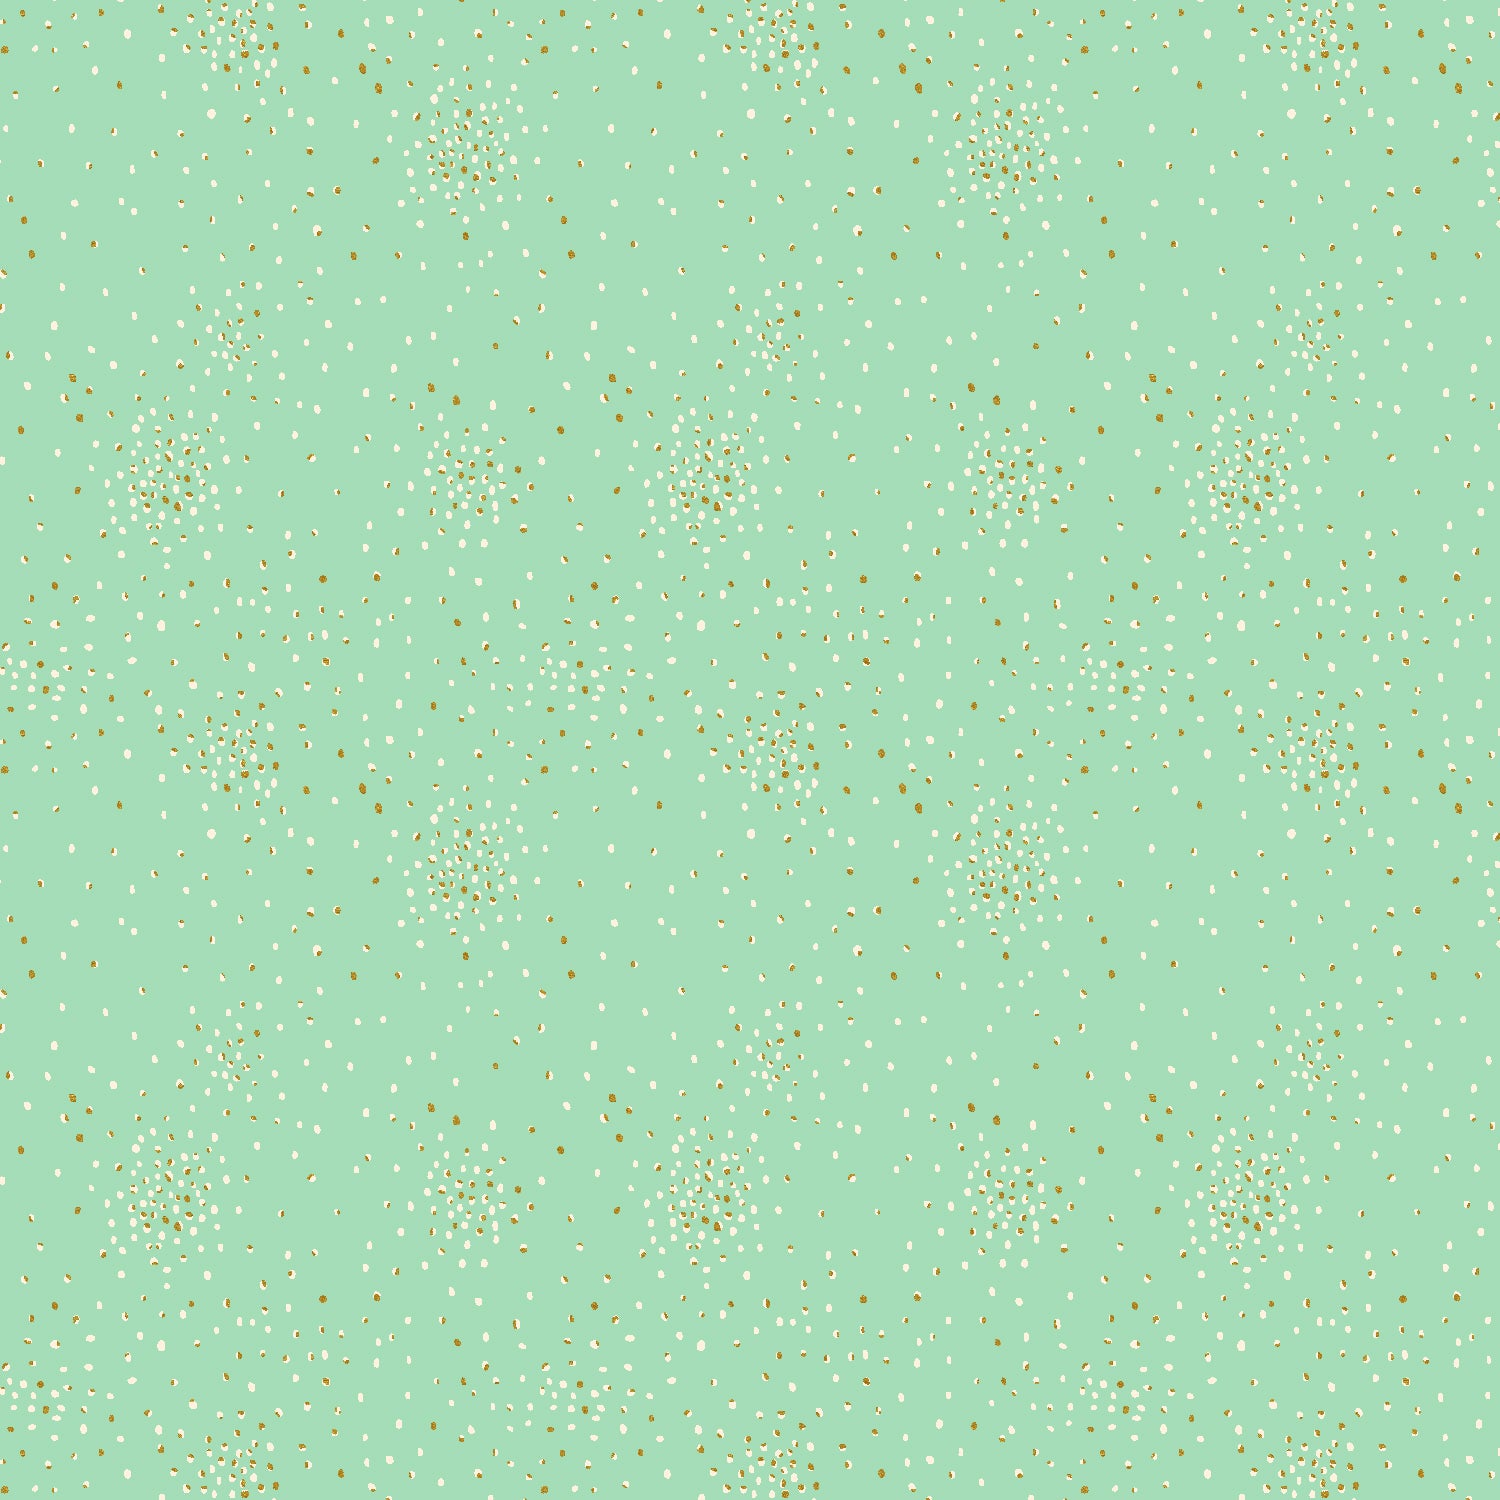 Clusters Quilt Fabric by Cotton+Steel - Ice Crystal Metallic (Green) - CS107-IC5M